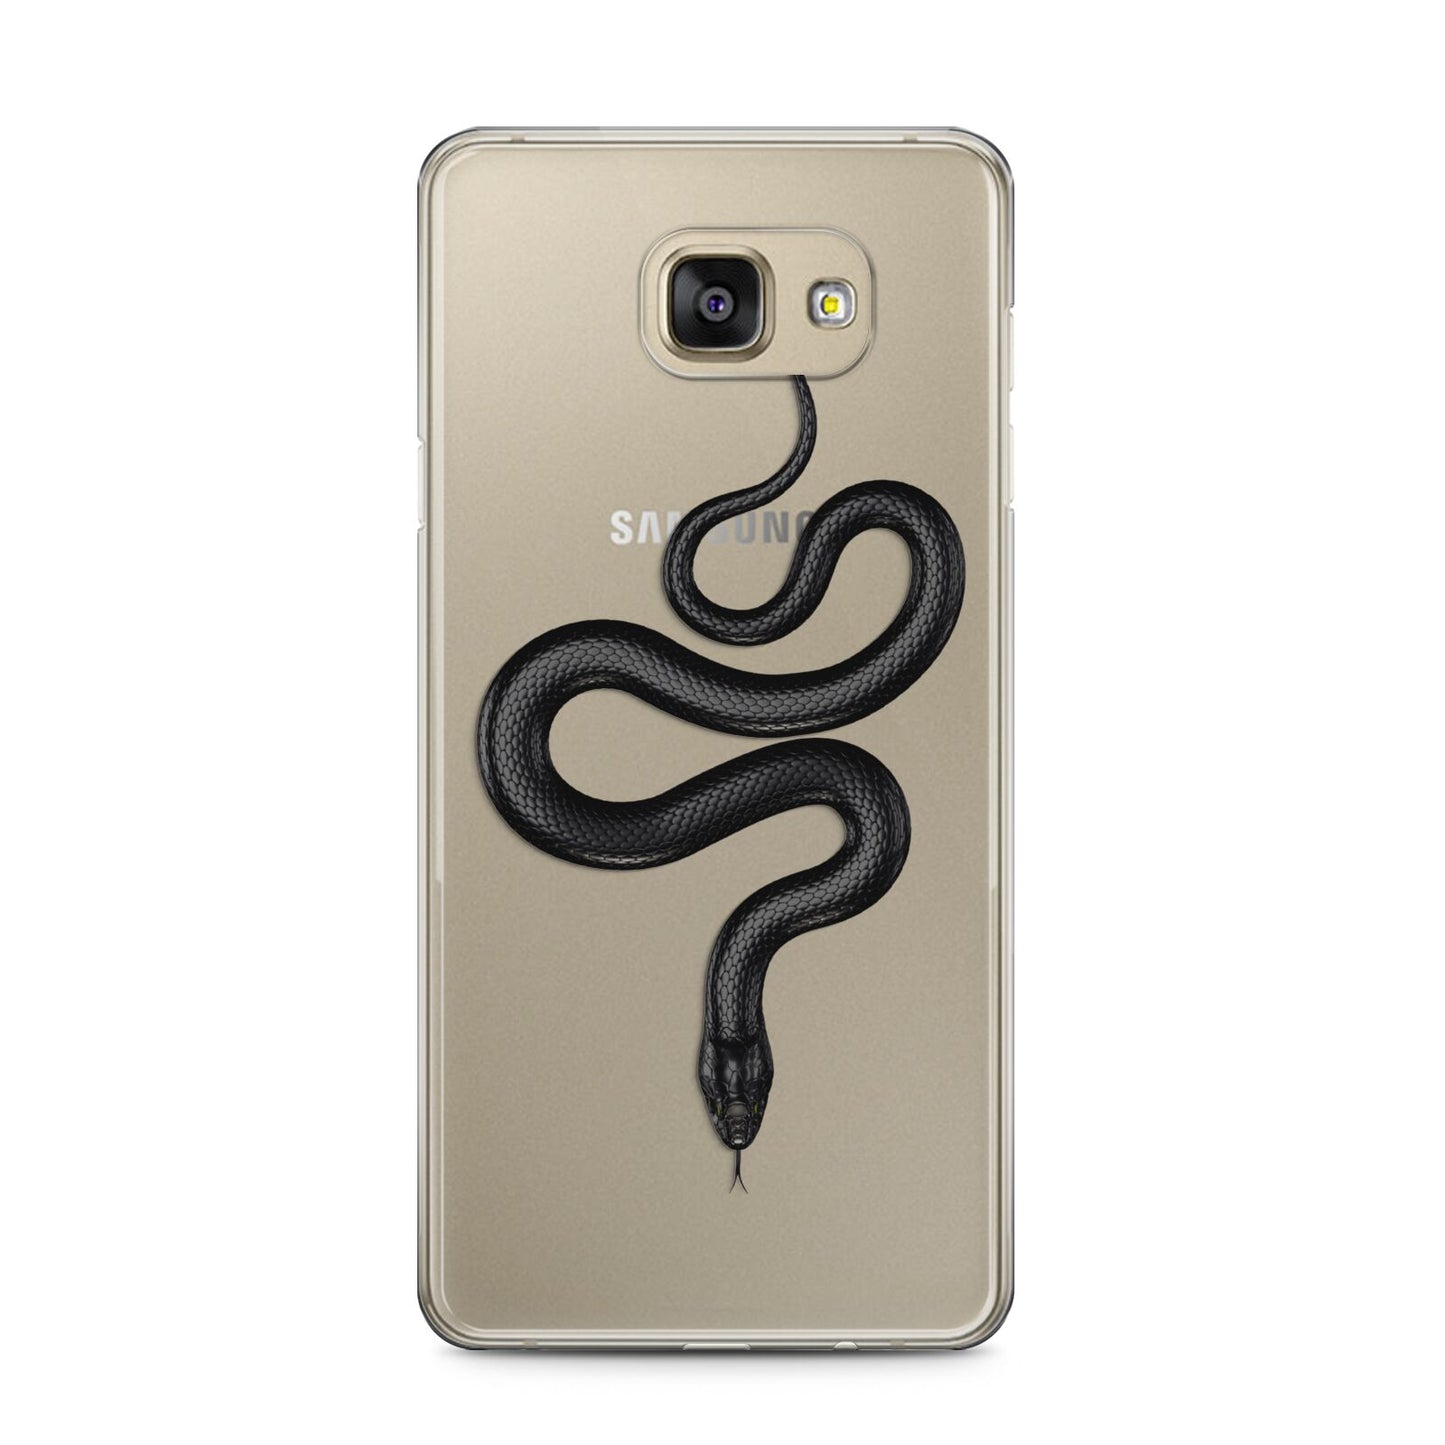 Snake Samsung Galaxy A5 2016 Case on gold phone